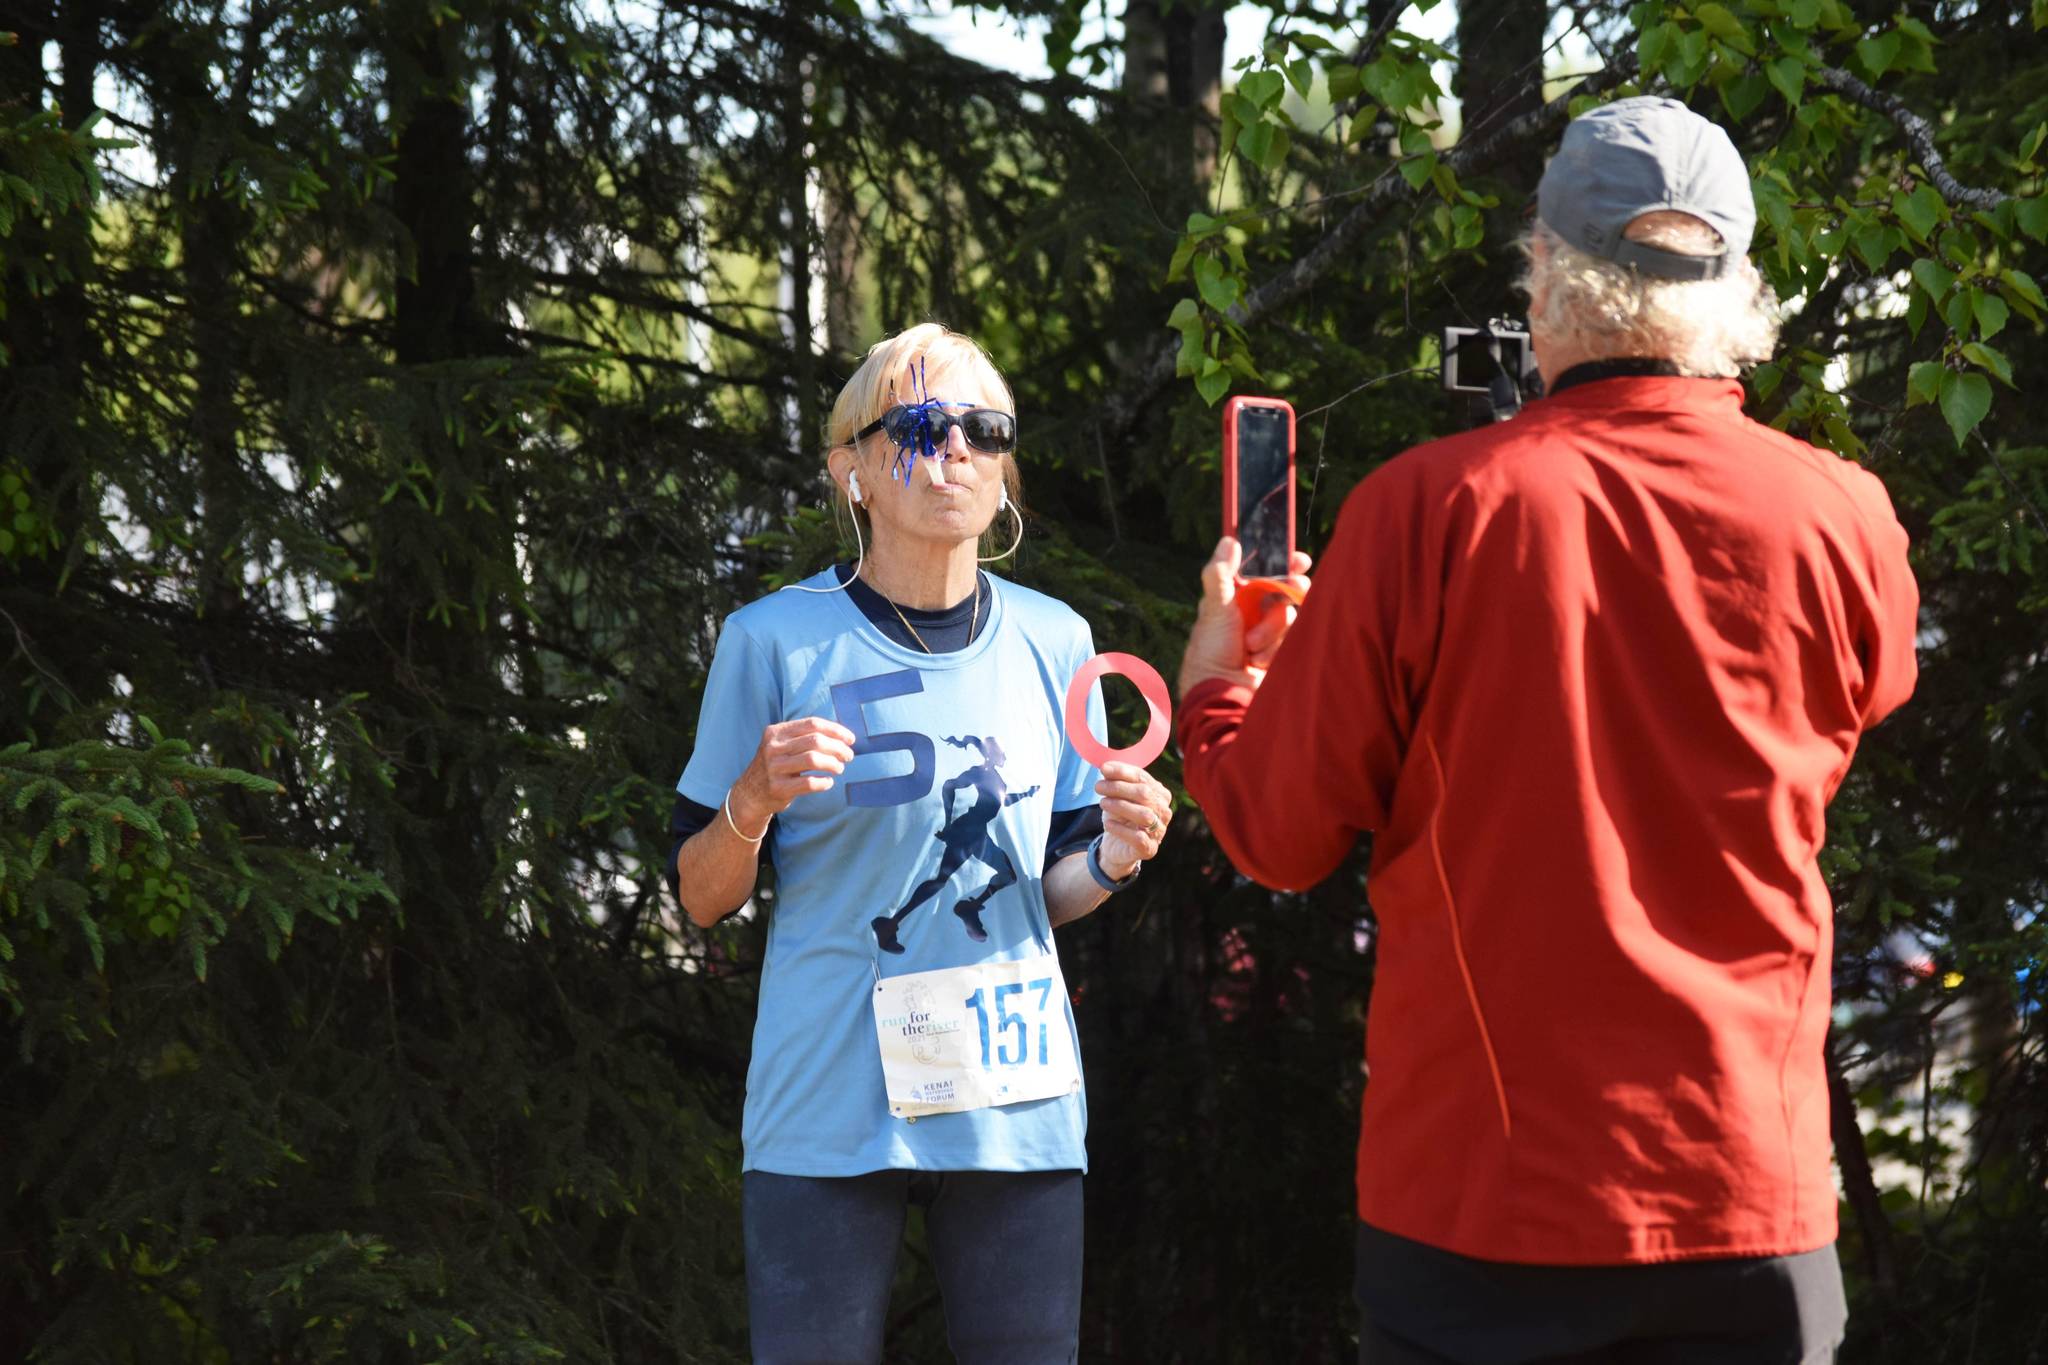 Susie Pline finishes her 50th run in her 50th state at the Kenai Watershed Forum’s Run for the River in Soldotna Creek Park on Saturday, June 12, 2021. (Camille Botello/Peninsula Clarion)